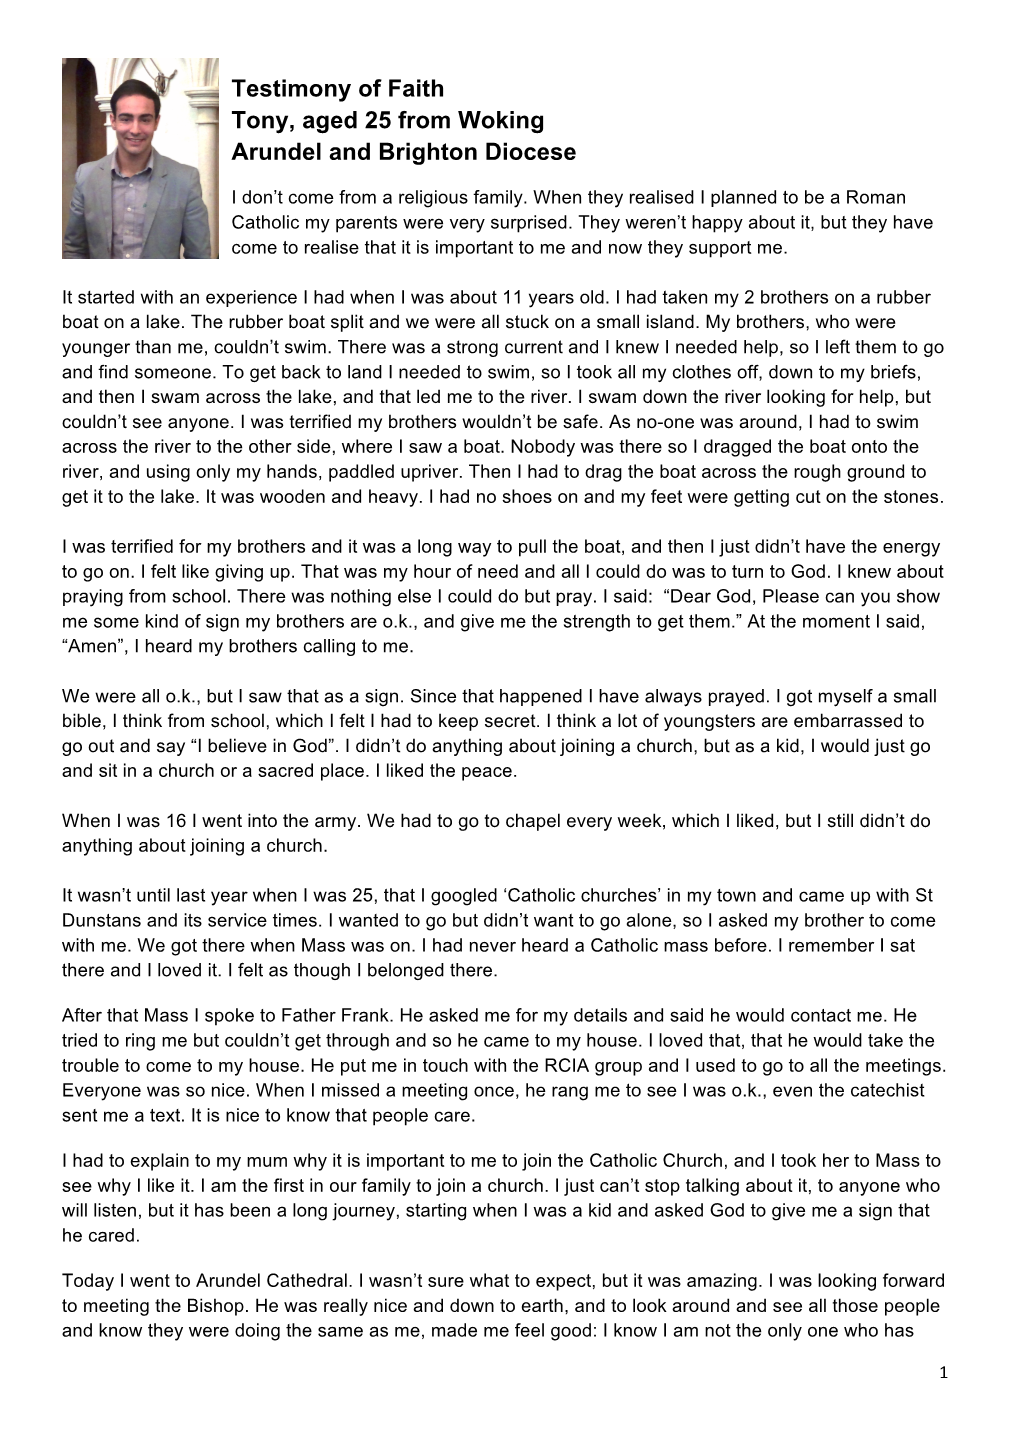 Testimony of Faith Tony, Aged 25 from Woking Arundel and Brighton Diocese